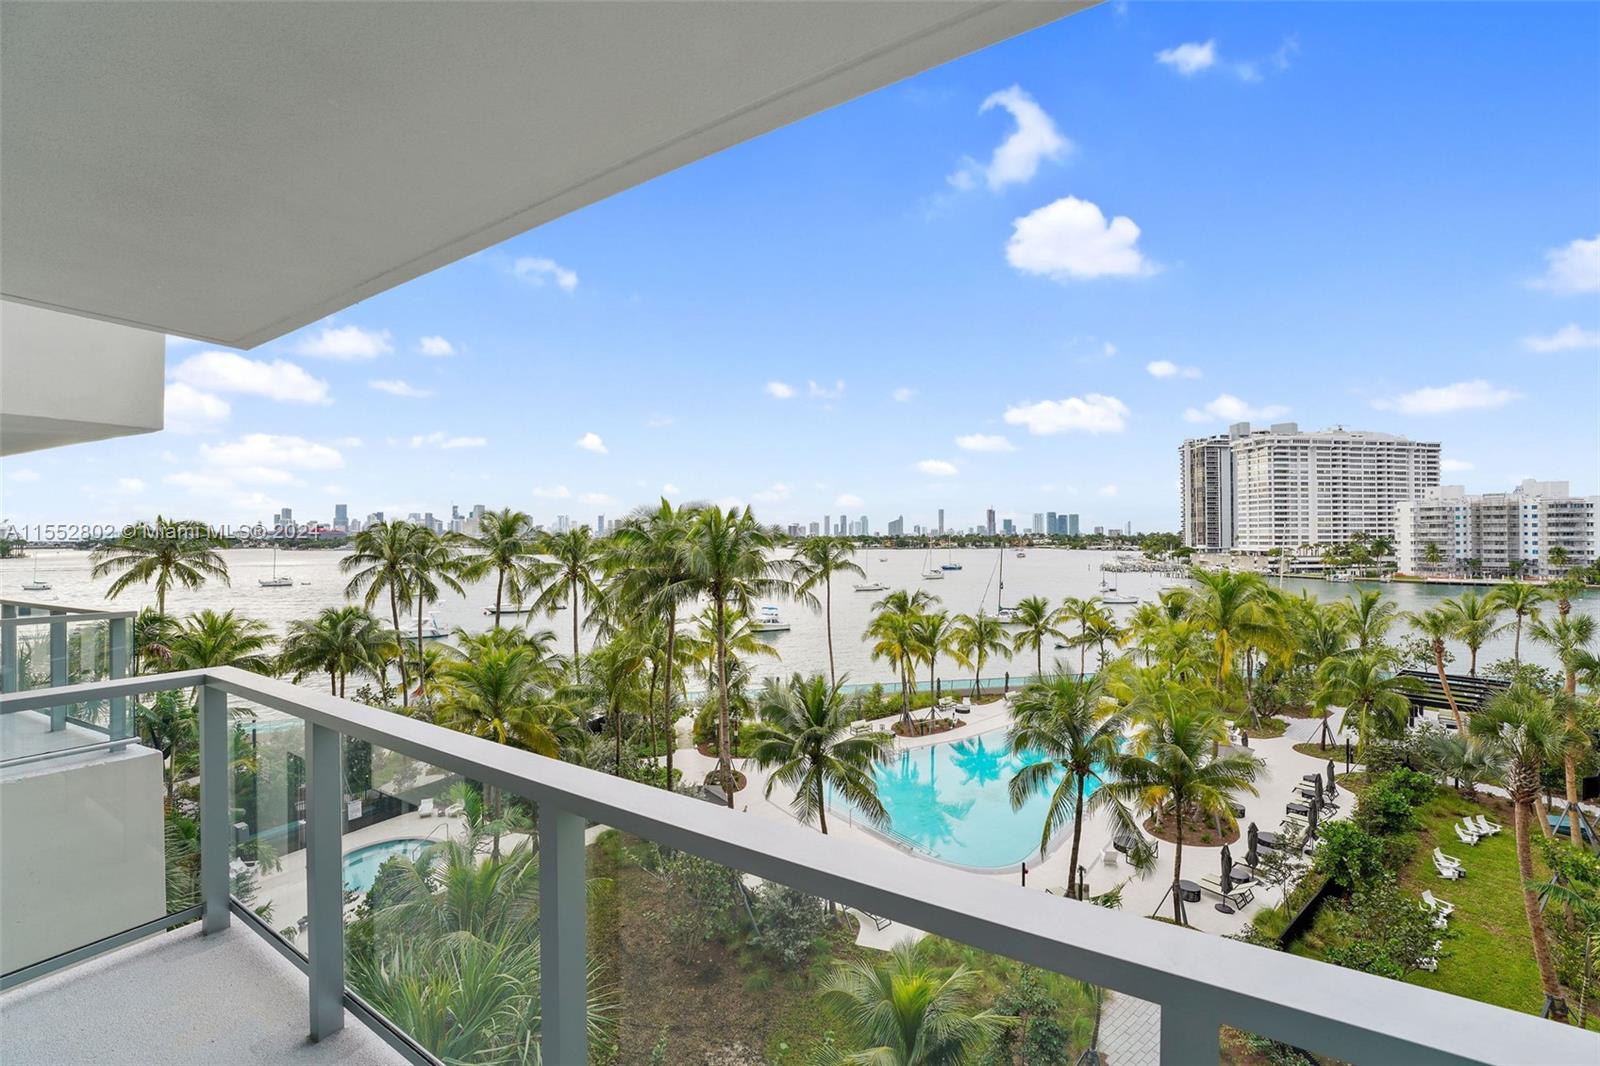 AVAILABLE 04/23 (UNIT CAN'T BE SHOWN TILL AVAILABLE DATE). Photos may be from the exact unit on the same line but on another floor. Welcome to Flamingo Point Miami Beach's most exciting rental community. This unit features hardwood floors, modern kitchen & baths w/SS appliances & granite counter tops. Amenities include fitness center, two resort style pools with private cabanas, BBQ area and much more. Move in costs are 1st month + $1500 deposit. Parking cost 1st vchl. $187 p/m. *FAST APPROVAL! (NOTE: Rental rates are subject to change depending on move-in date and lease term. Advertised rate is best rate and maybe on leases longer than 12 months. Income must be greater than 3x one month's rent and minimum credit score of 620 in order to be approved).